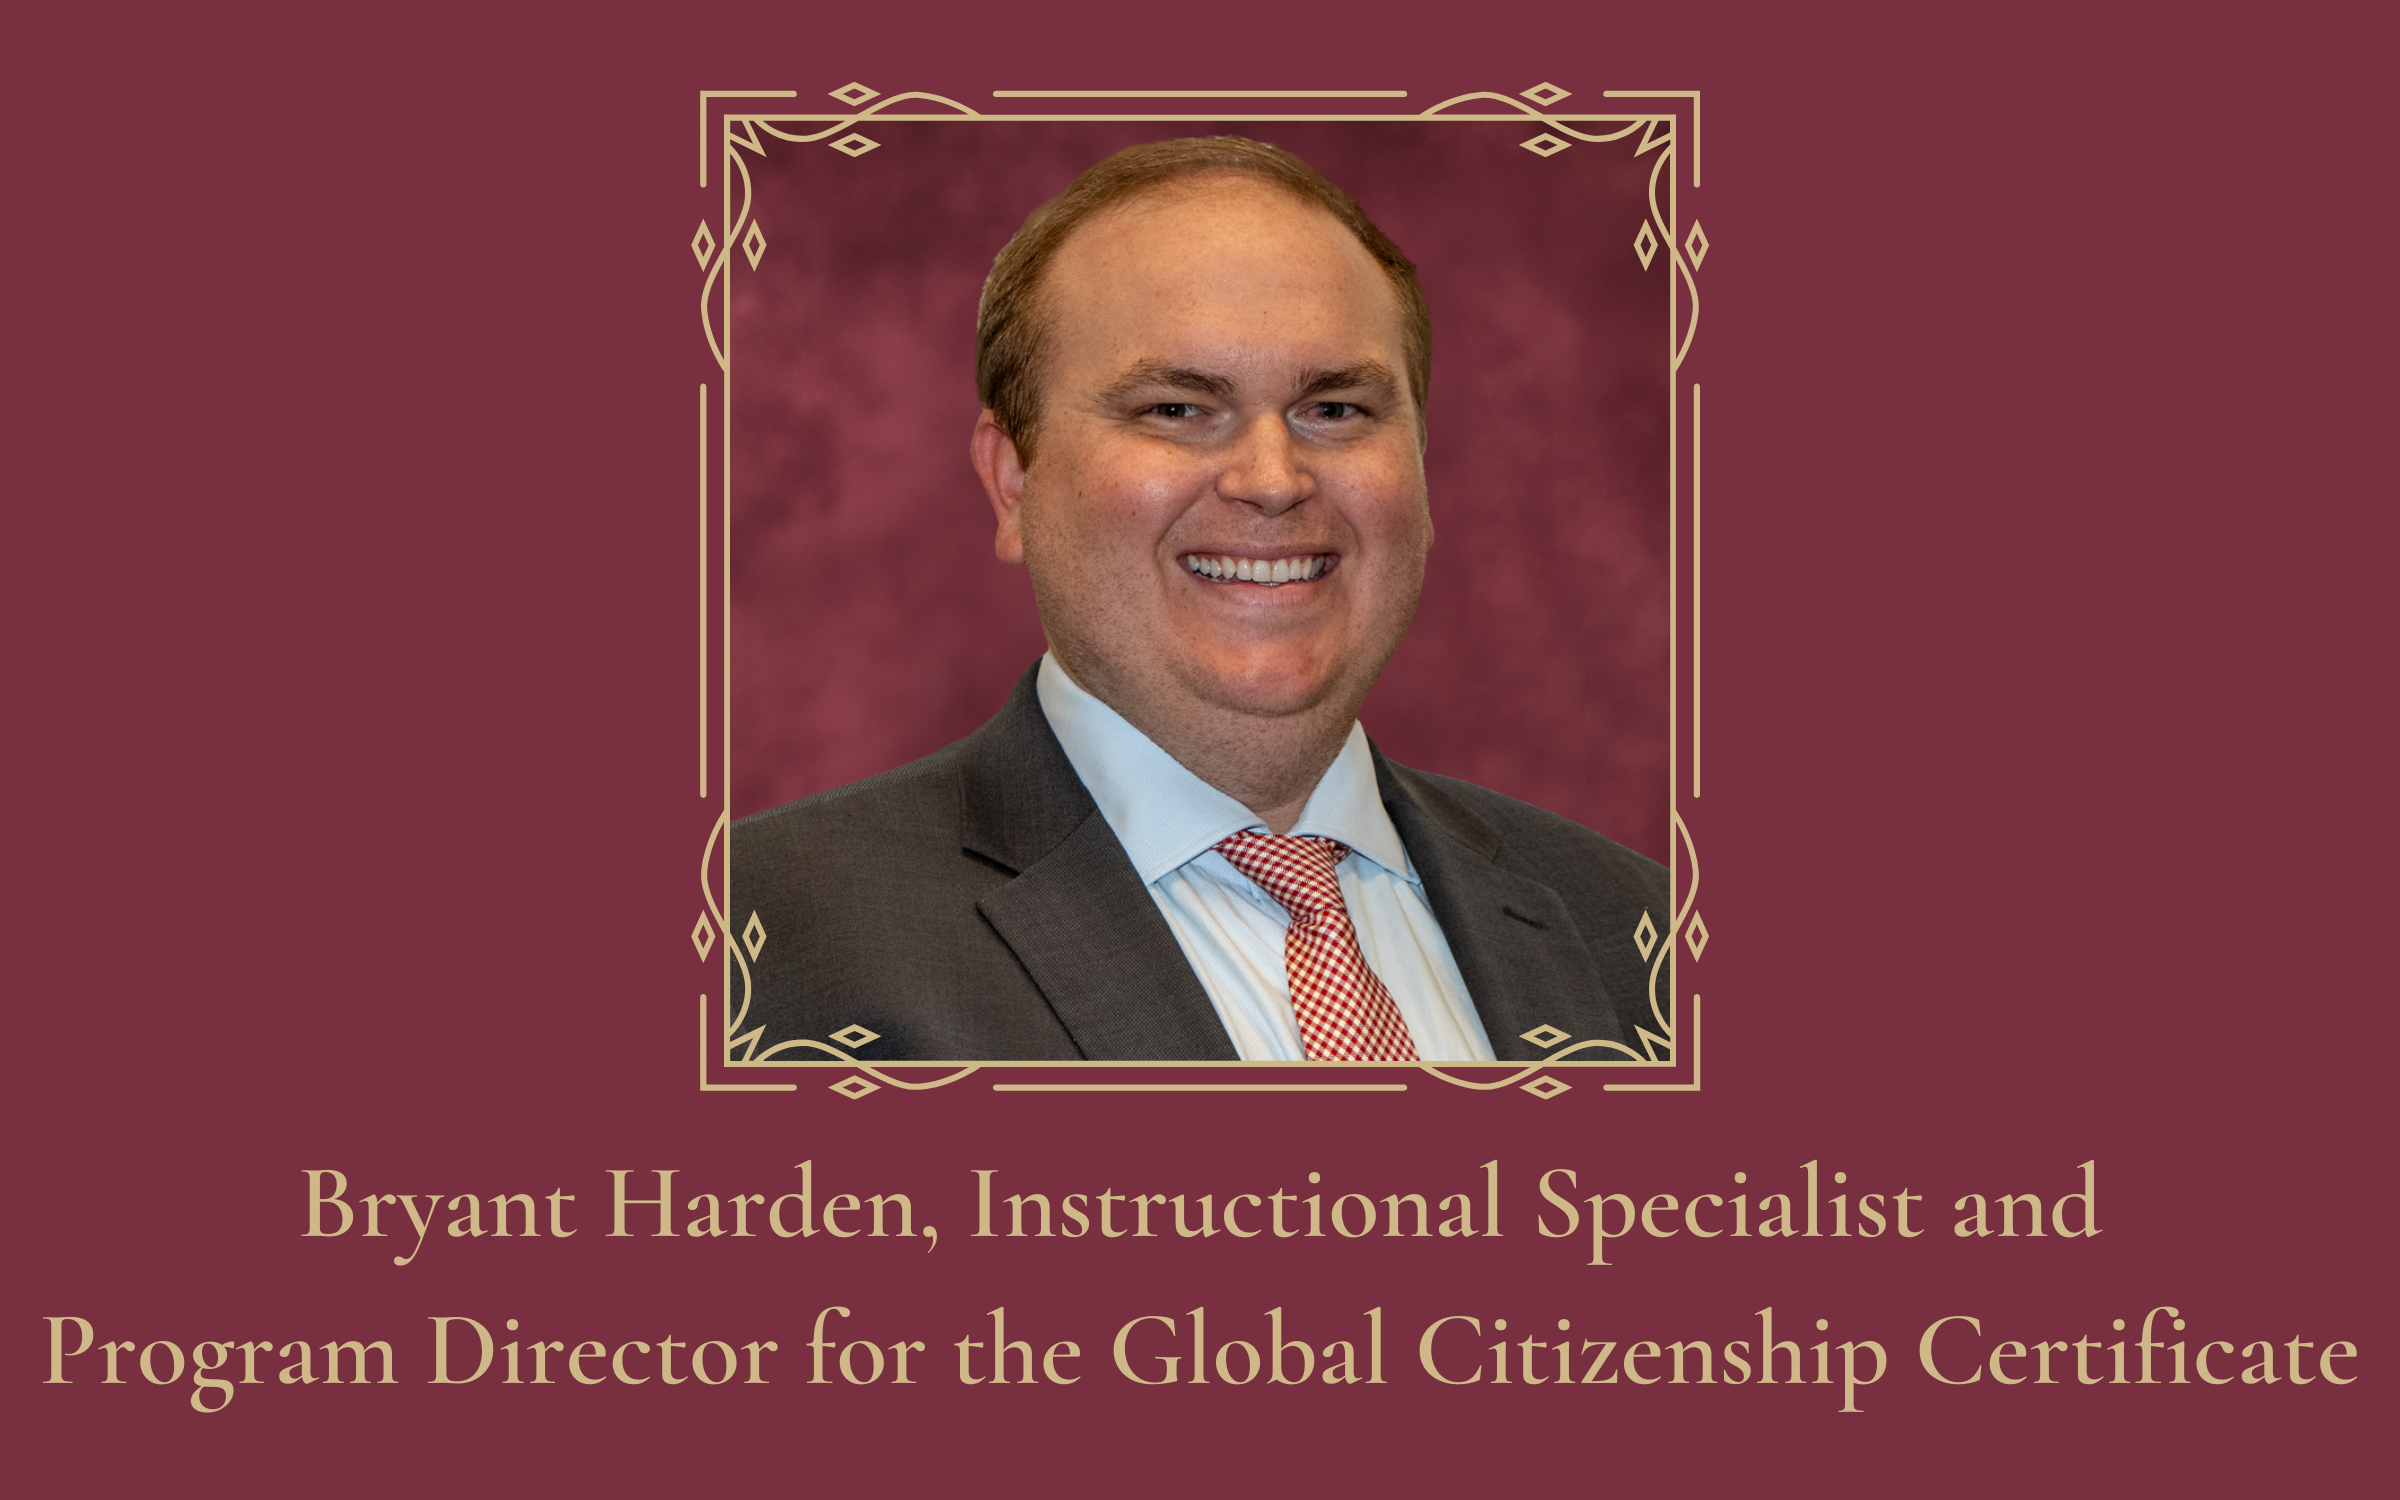 The CGE Introduces Bryant Harden, the new Instructional Specialist and Program Director for the Global Citizenship Certificate